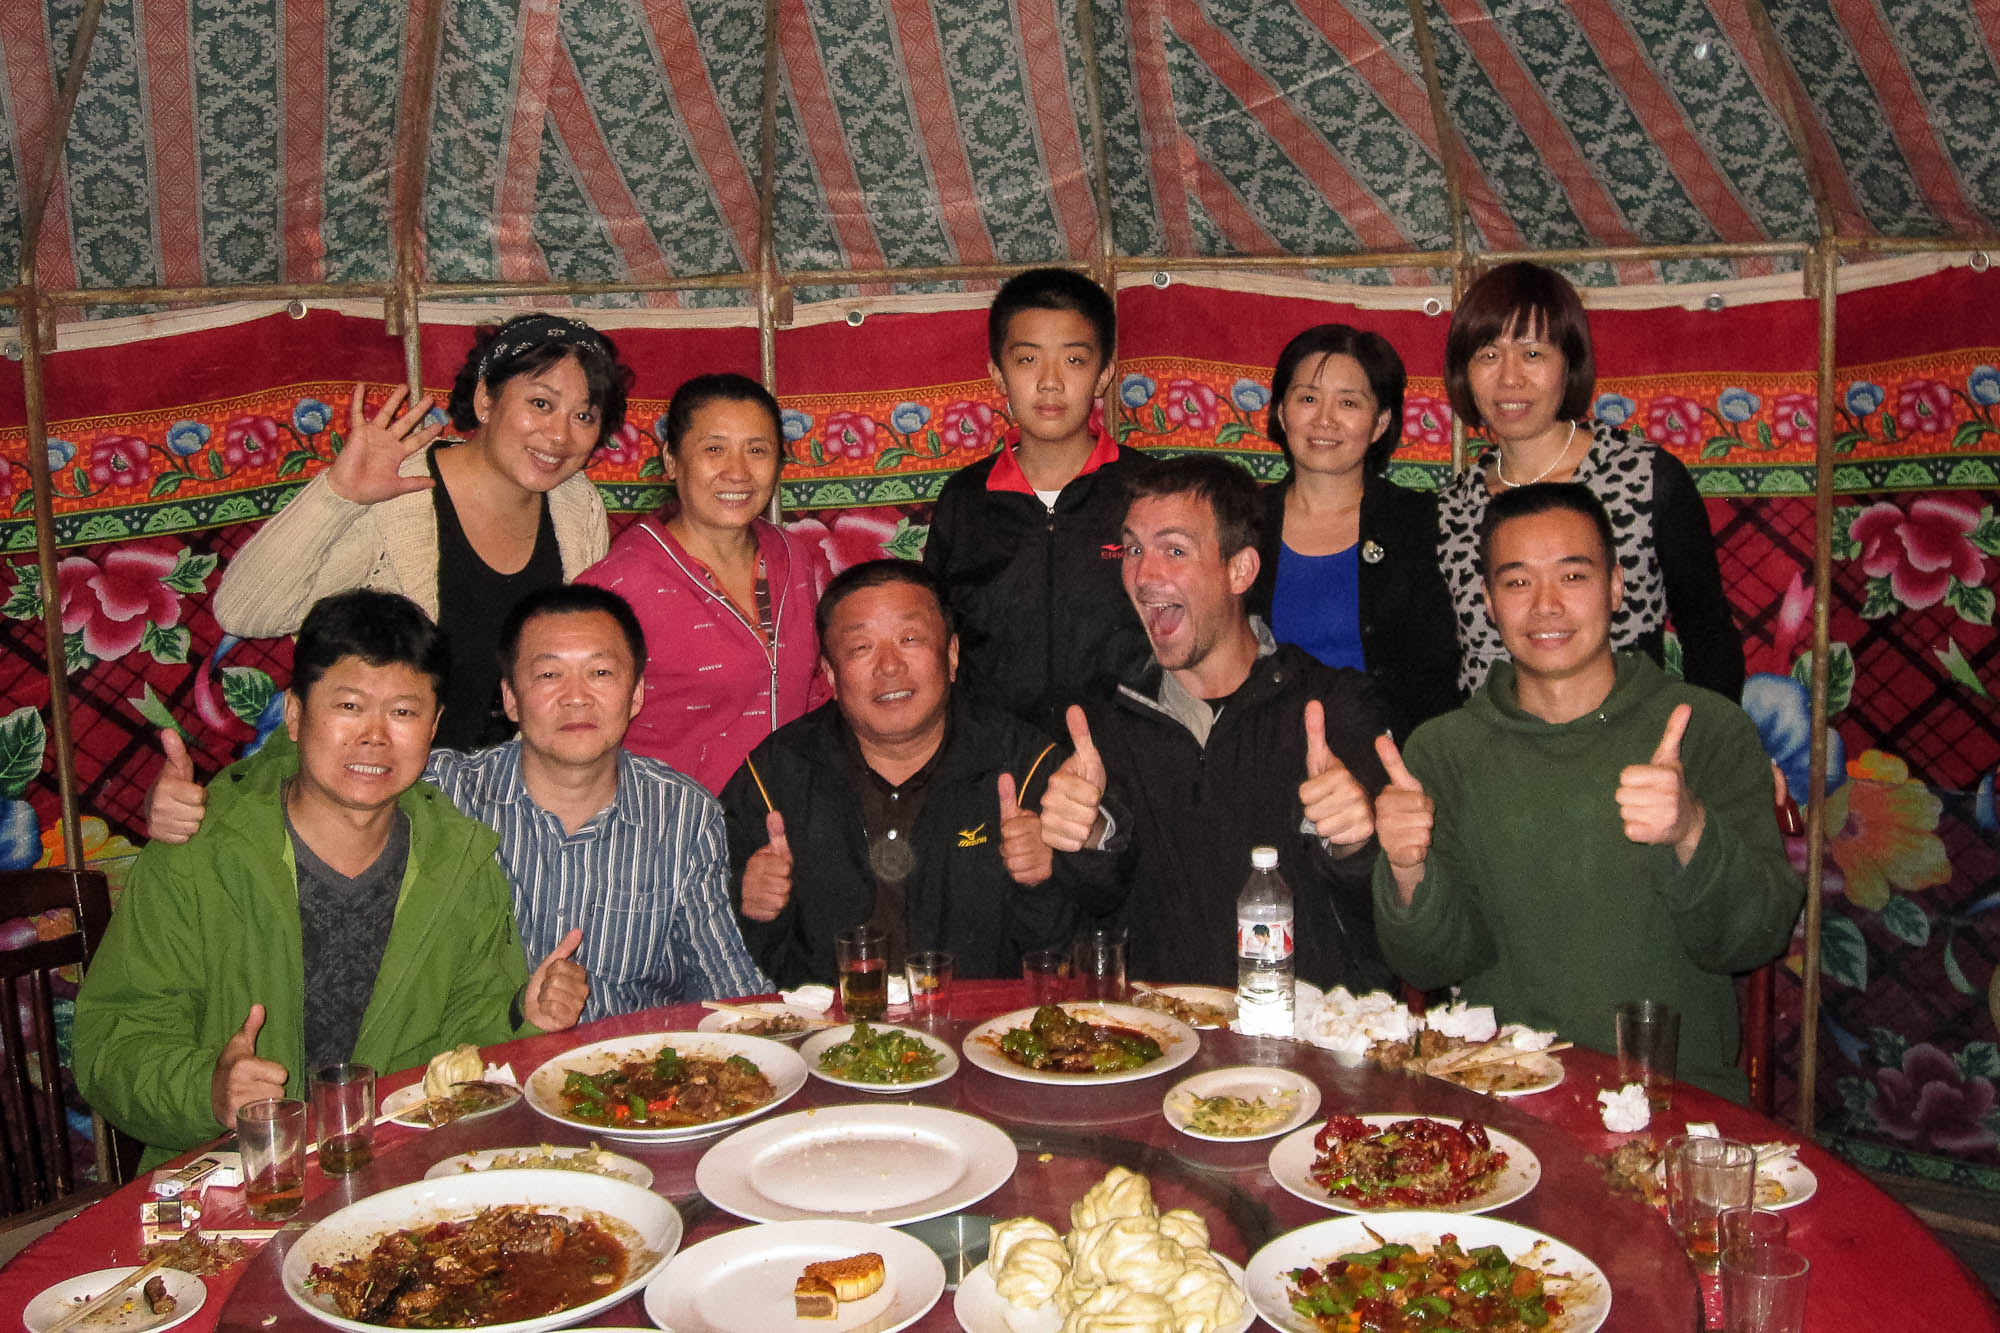 Some of the good people of Kuytun invited me to dinner